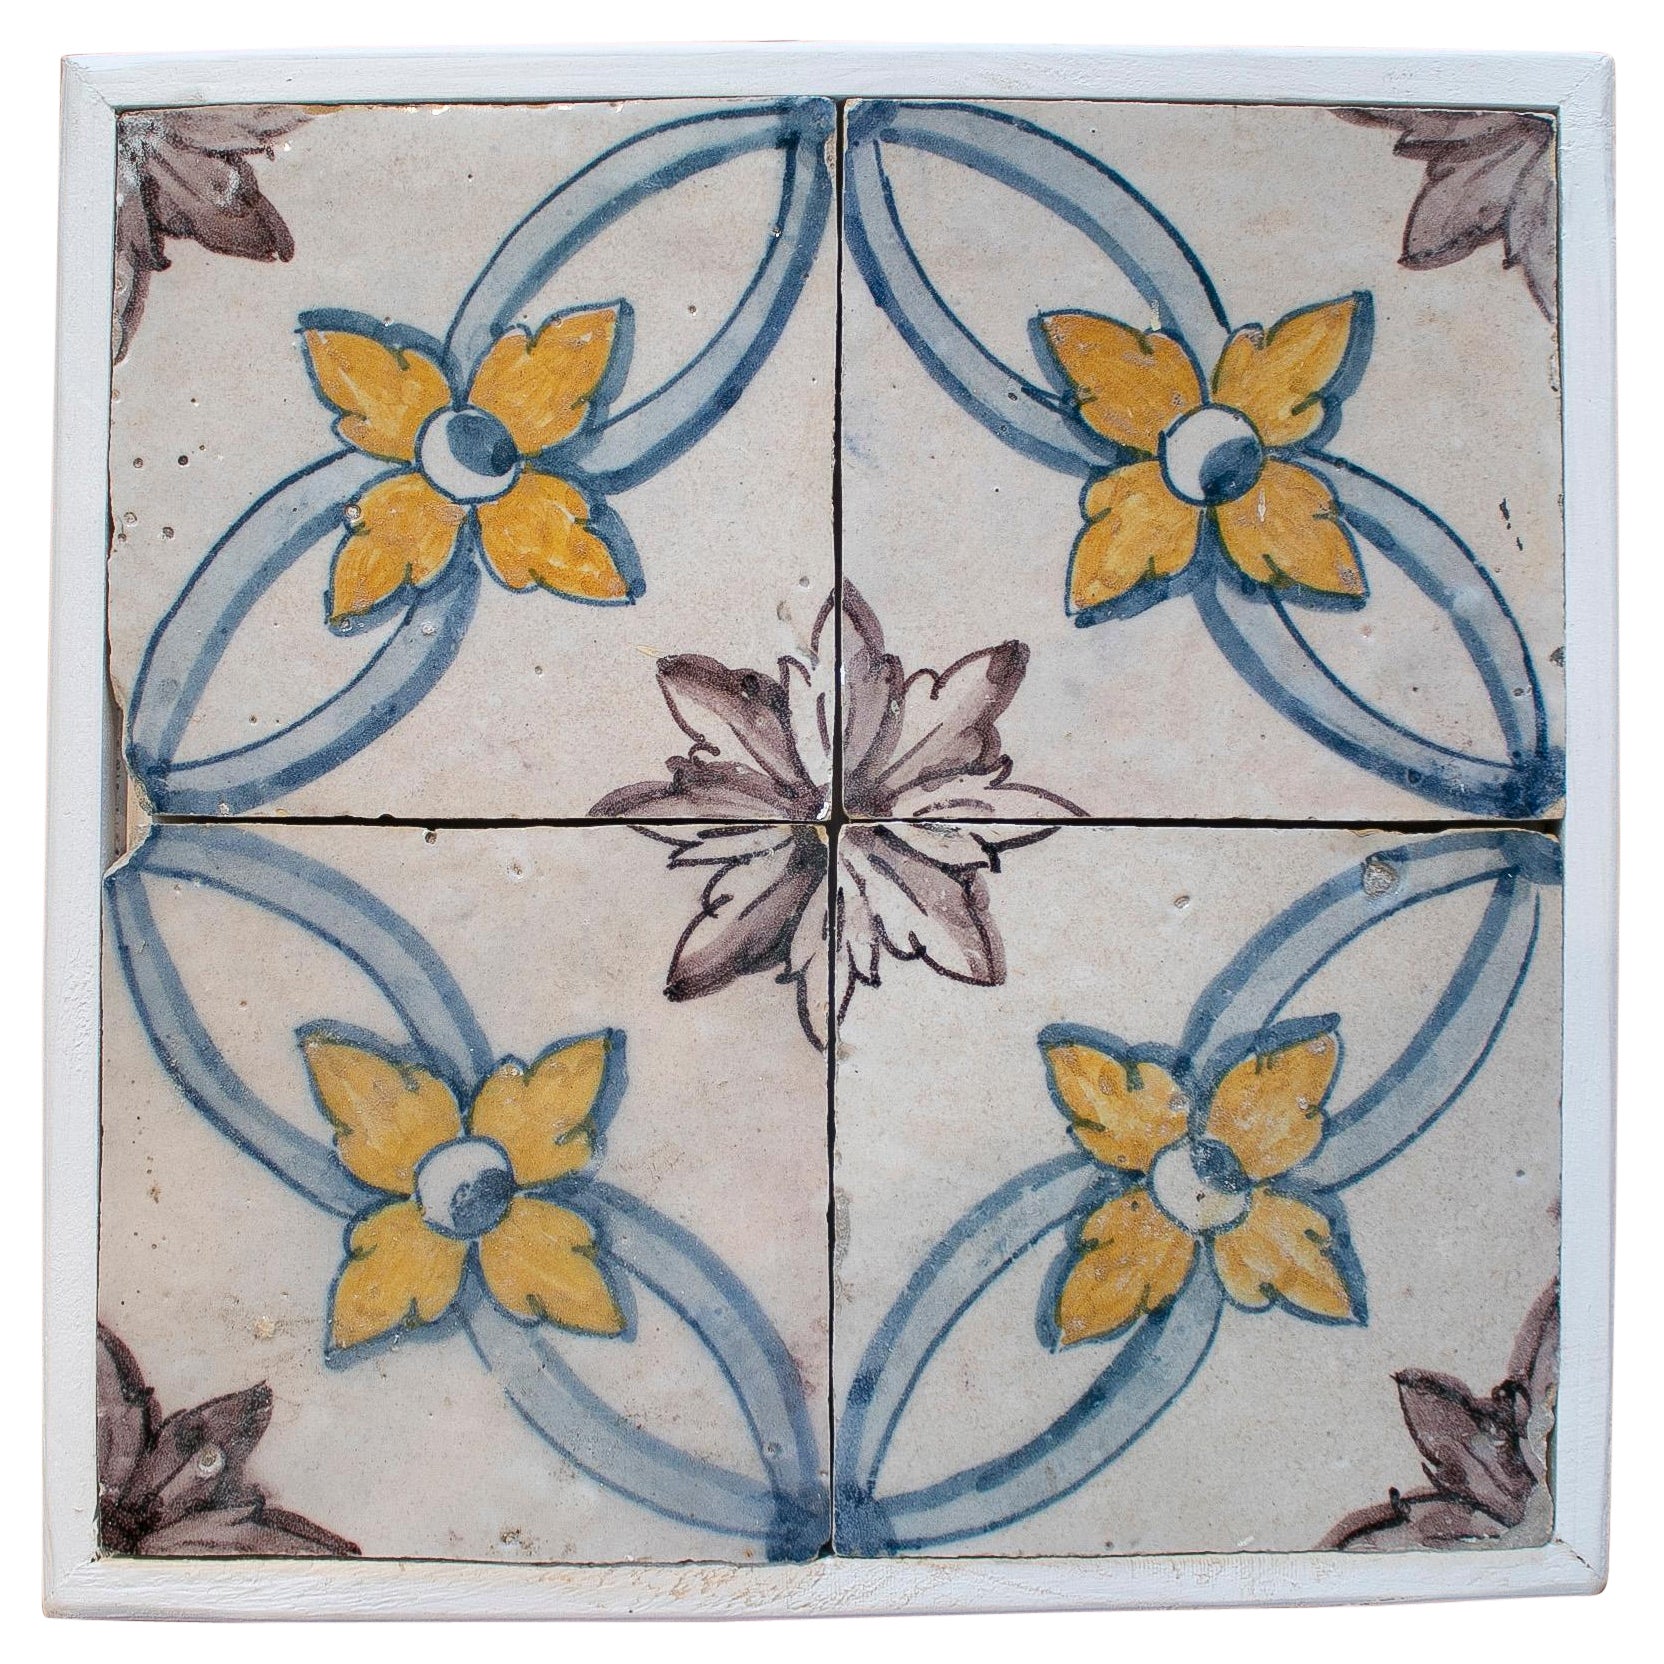 Set of Four 19th Century Portuguese Hand Painted Glazed Ceramic Patterned Tiles